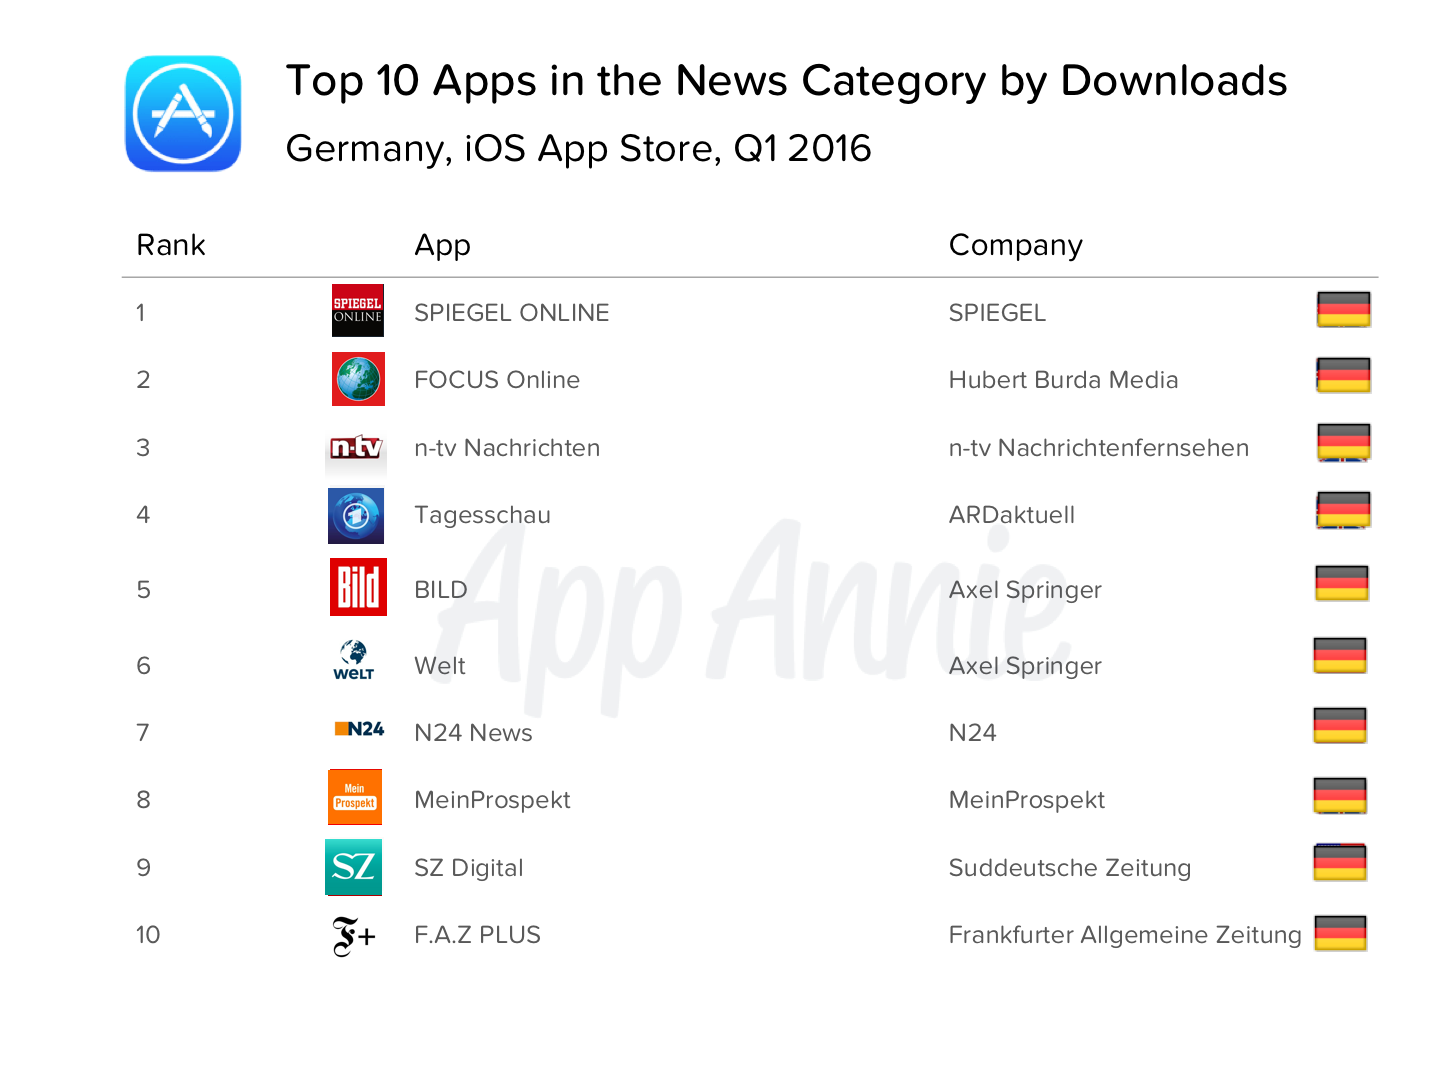 Top 10 Apps in the News Category by Downloads Germany iOS App Store Q1 2016